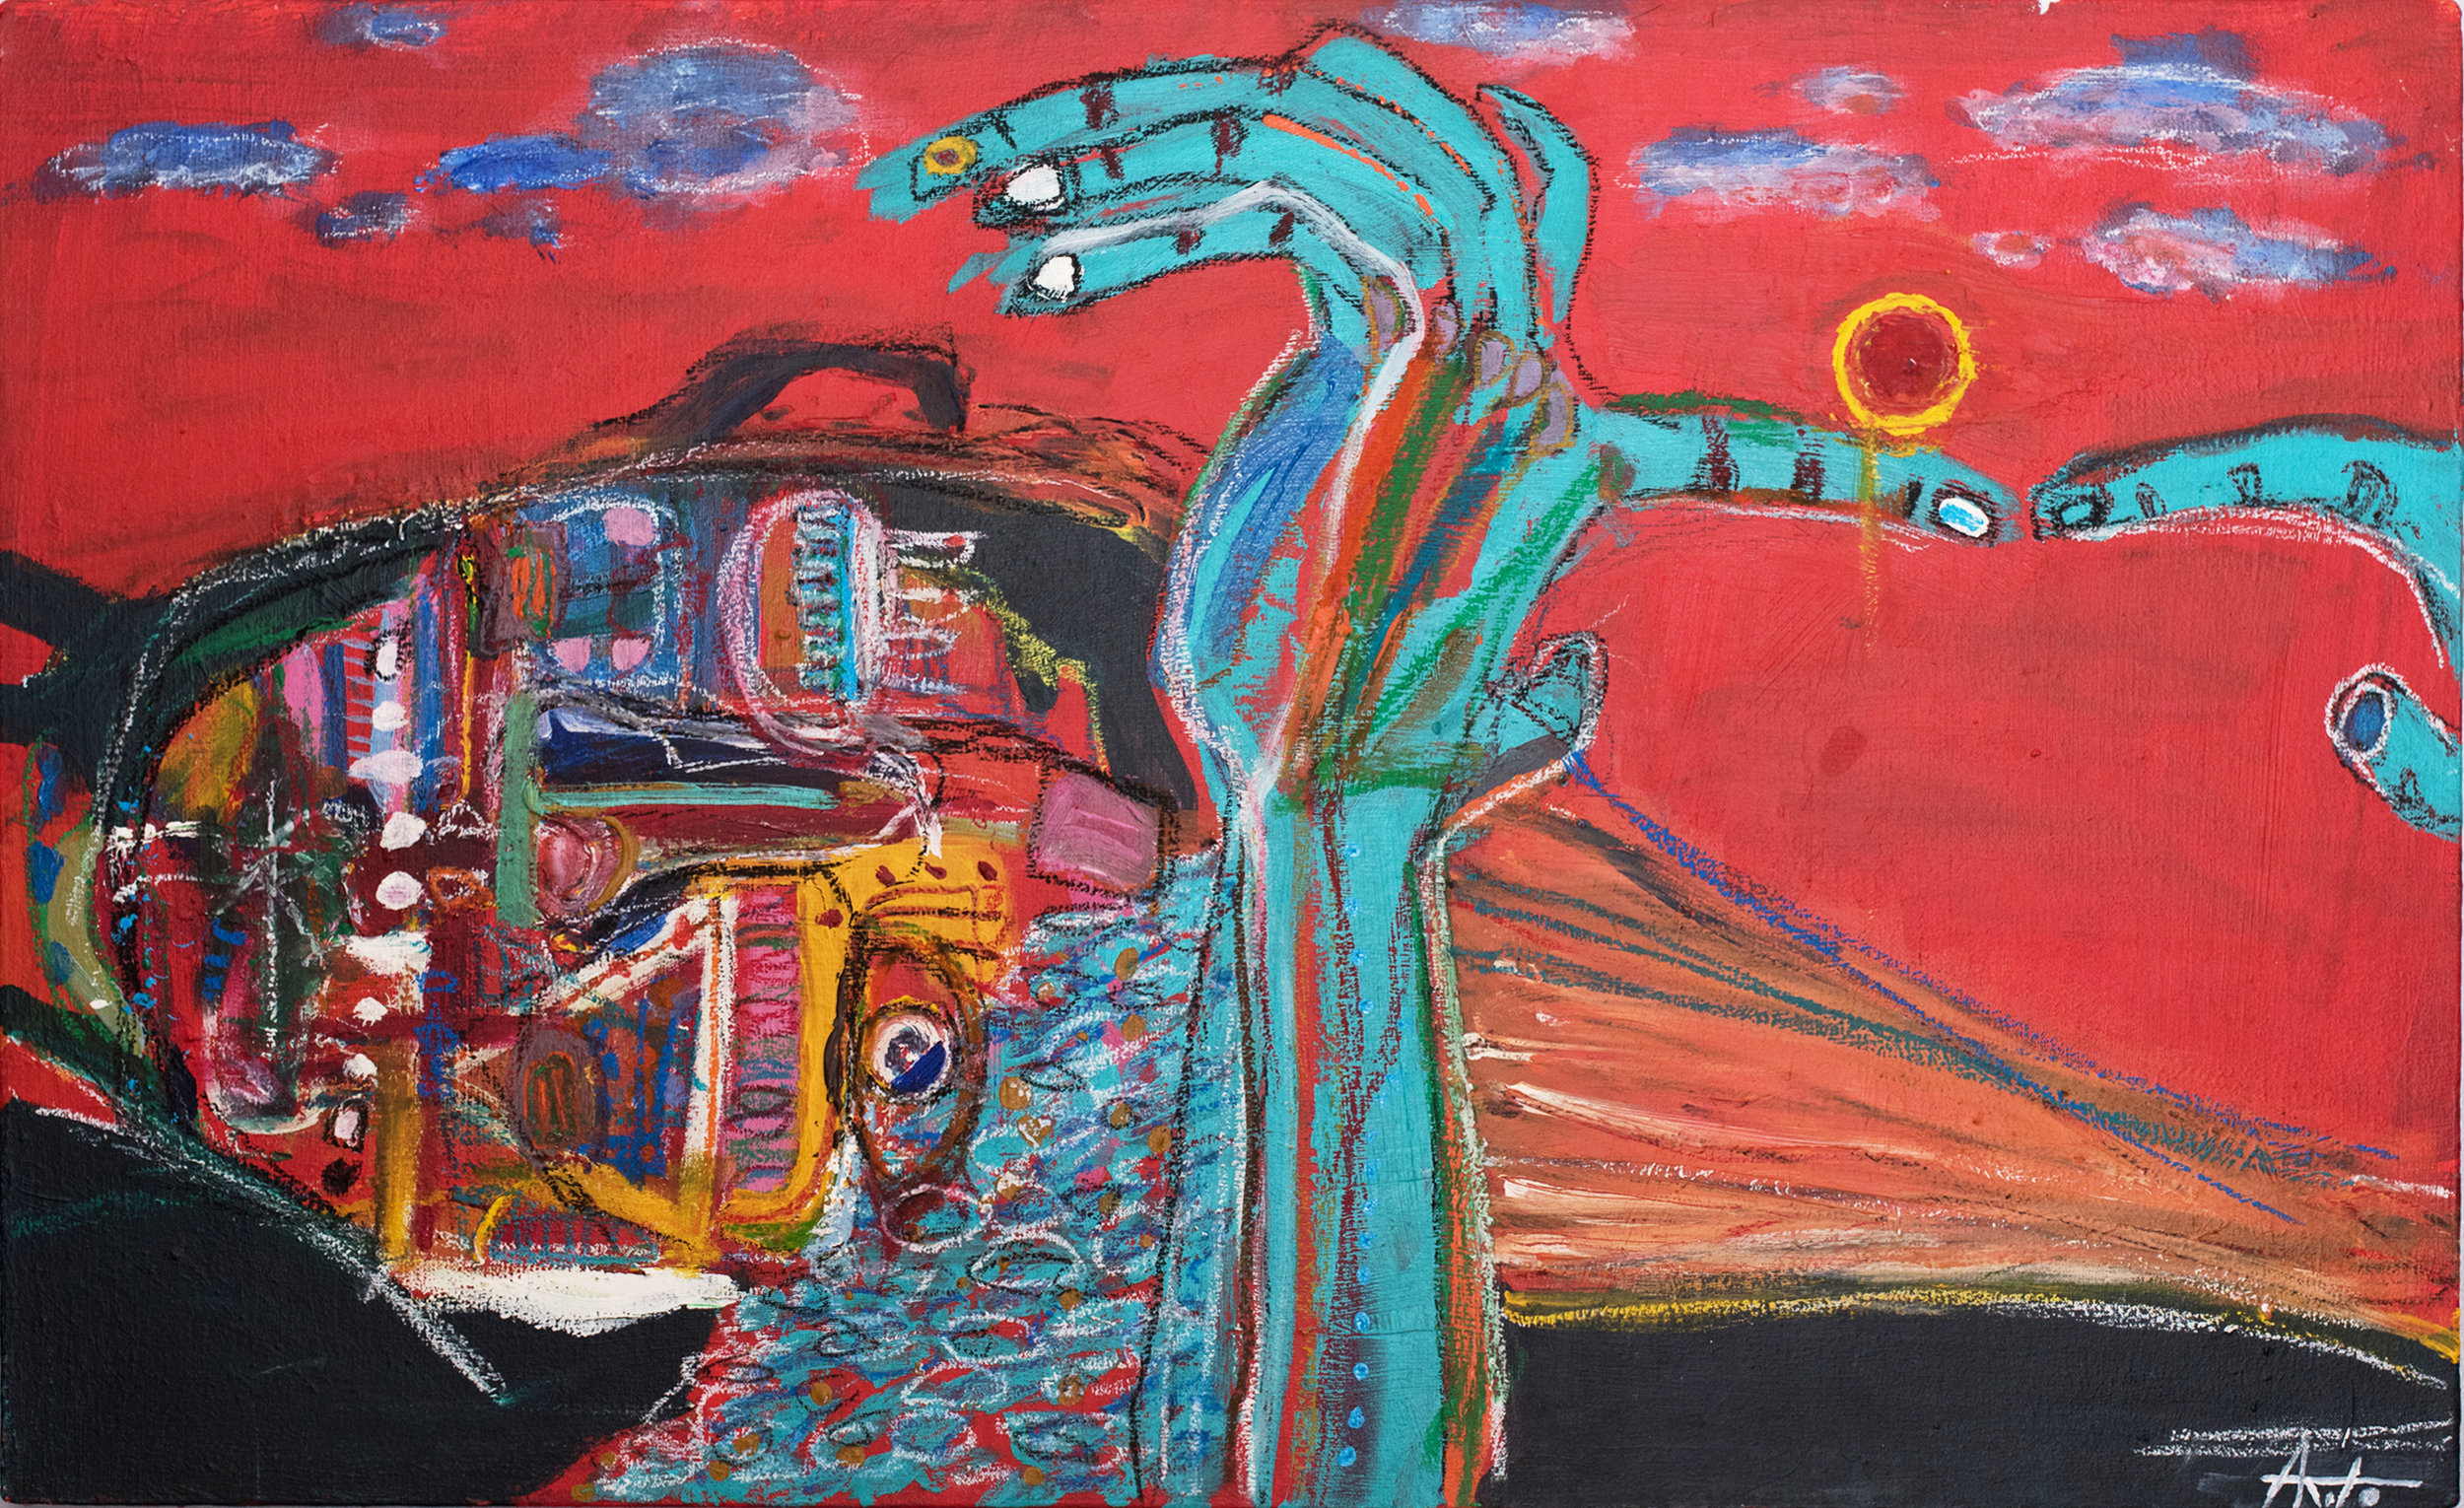    " Plaza, Sunset "    36 × 22 in  2015 